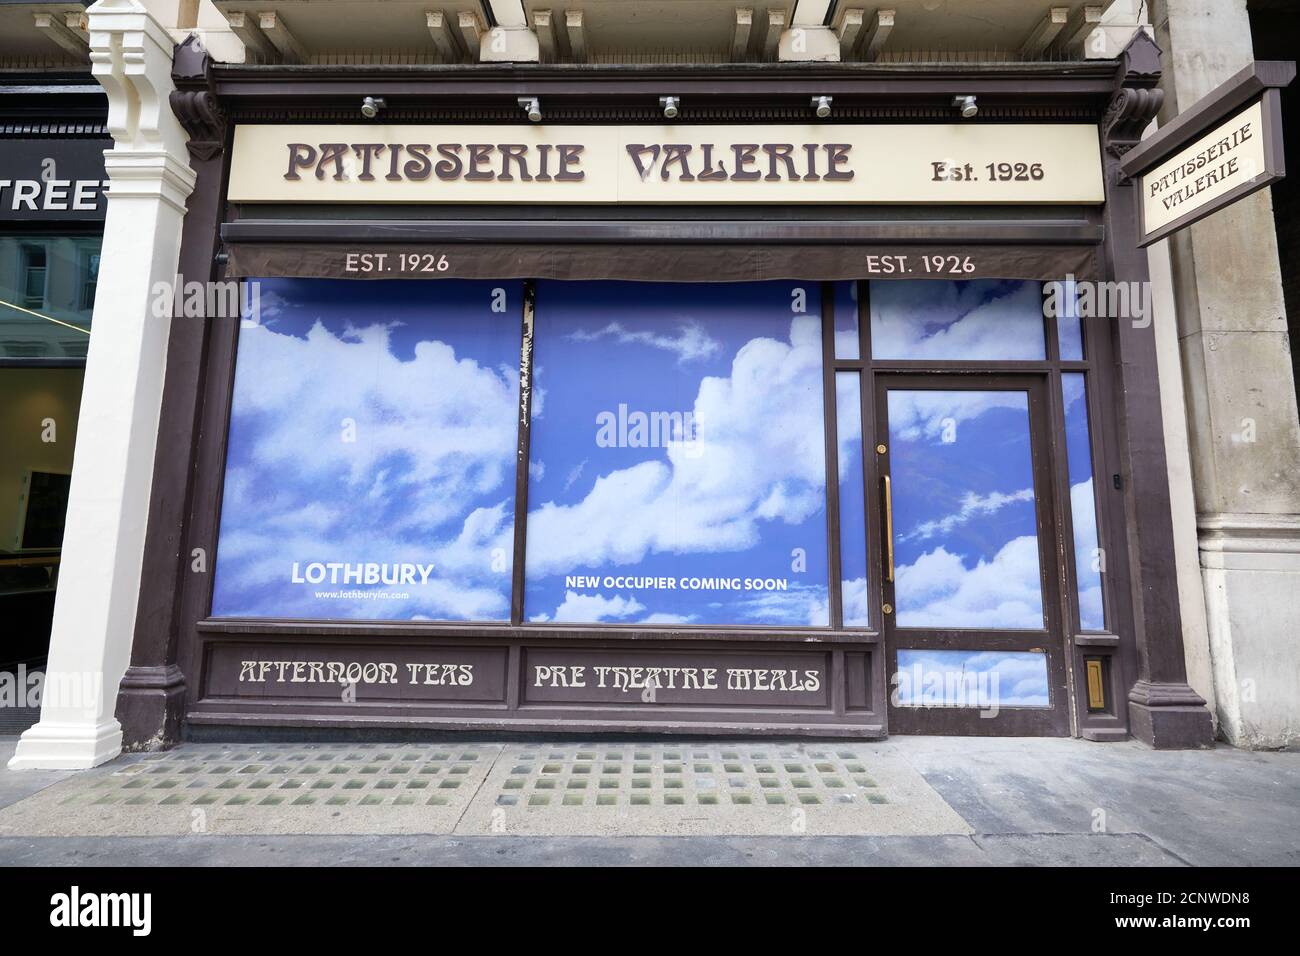 London, UK. - 18 Sept 2020: The former Patisserie Valerie store in Covent Garden, which remains boarded up. The cafe chain fell into administration in early 2019. Stock Photo